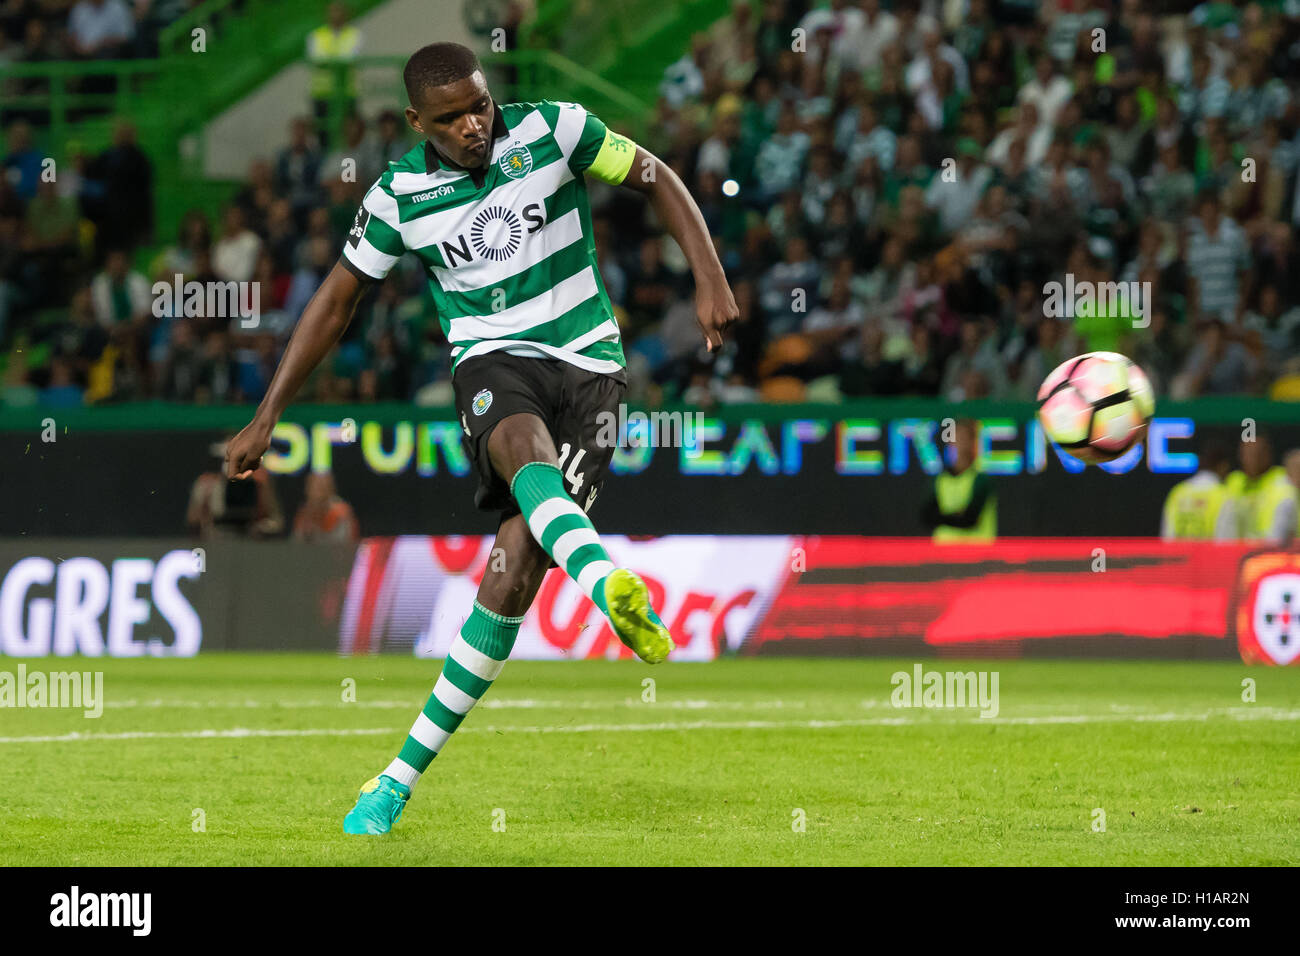 Portugal, Lisbon, Sep. 23, 2016 - PORTUGUESE FOOTBALL - Wlliam Carvalho in action during Portuguese First League match between Sporting and Estoril at Alvalade XXI Stadium, in Lisbon, Portugal. Credit:  Bruno de Carvalho/Alamy Live News Stock Photo